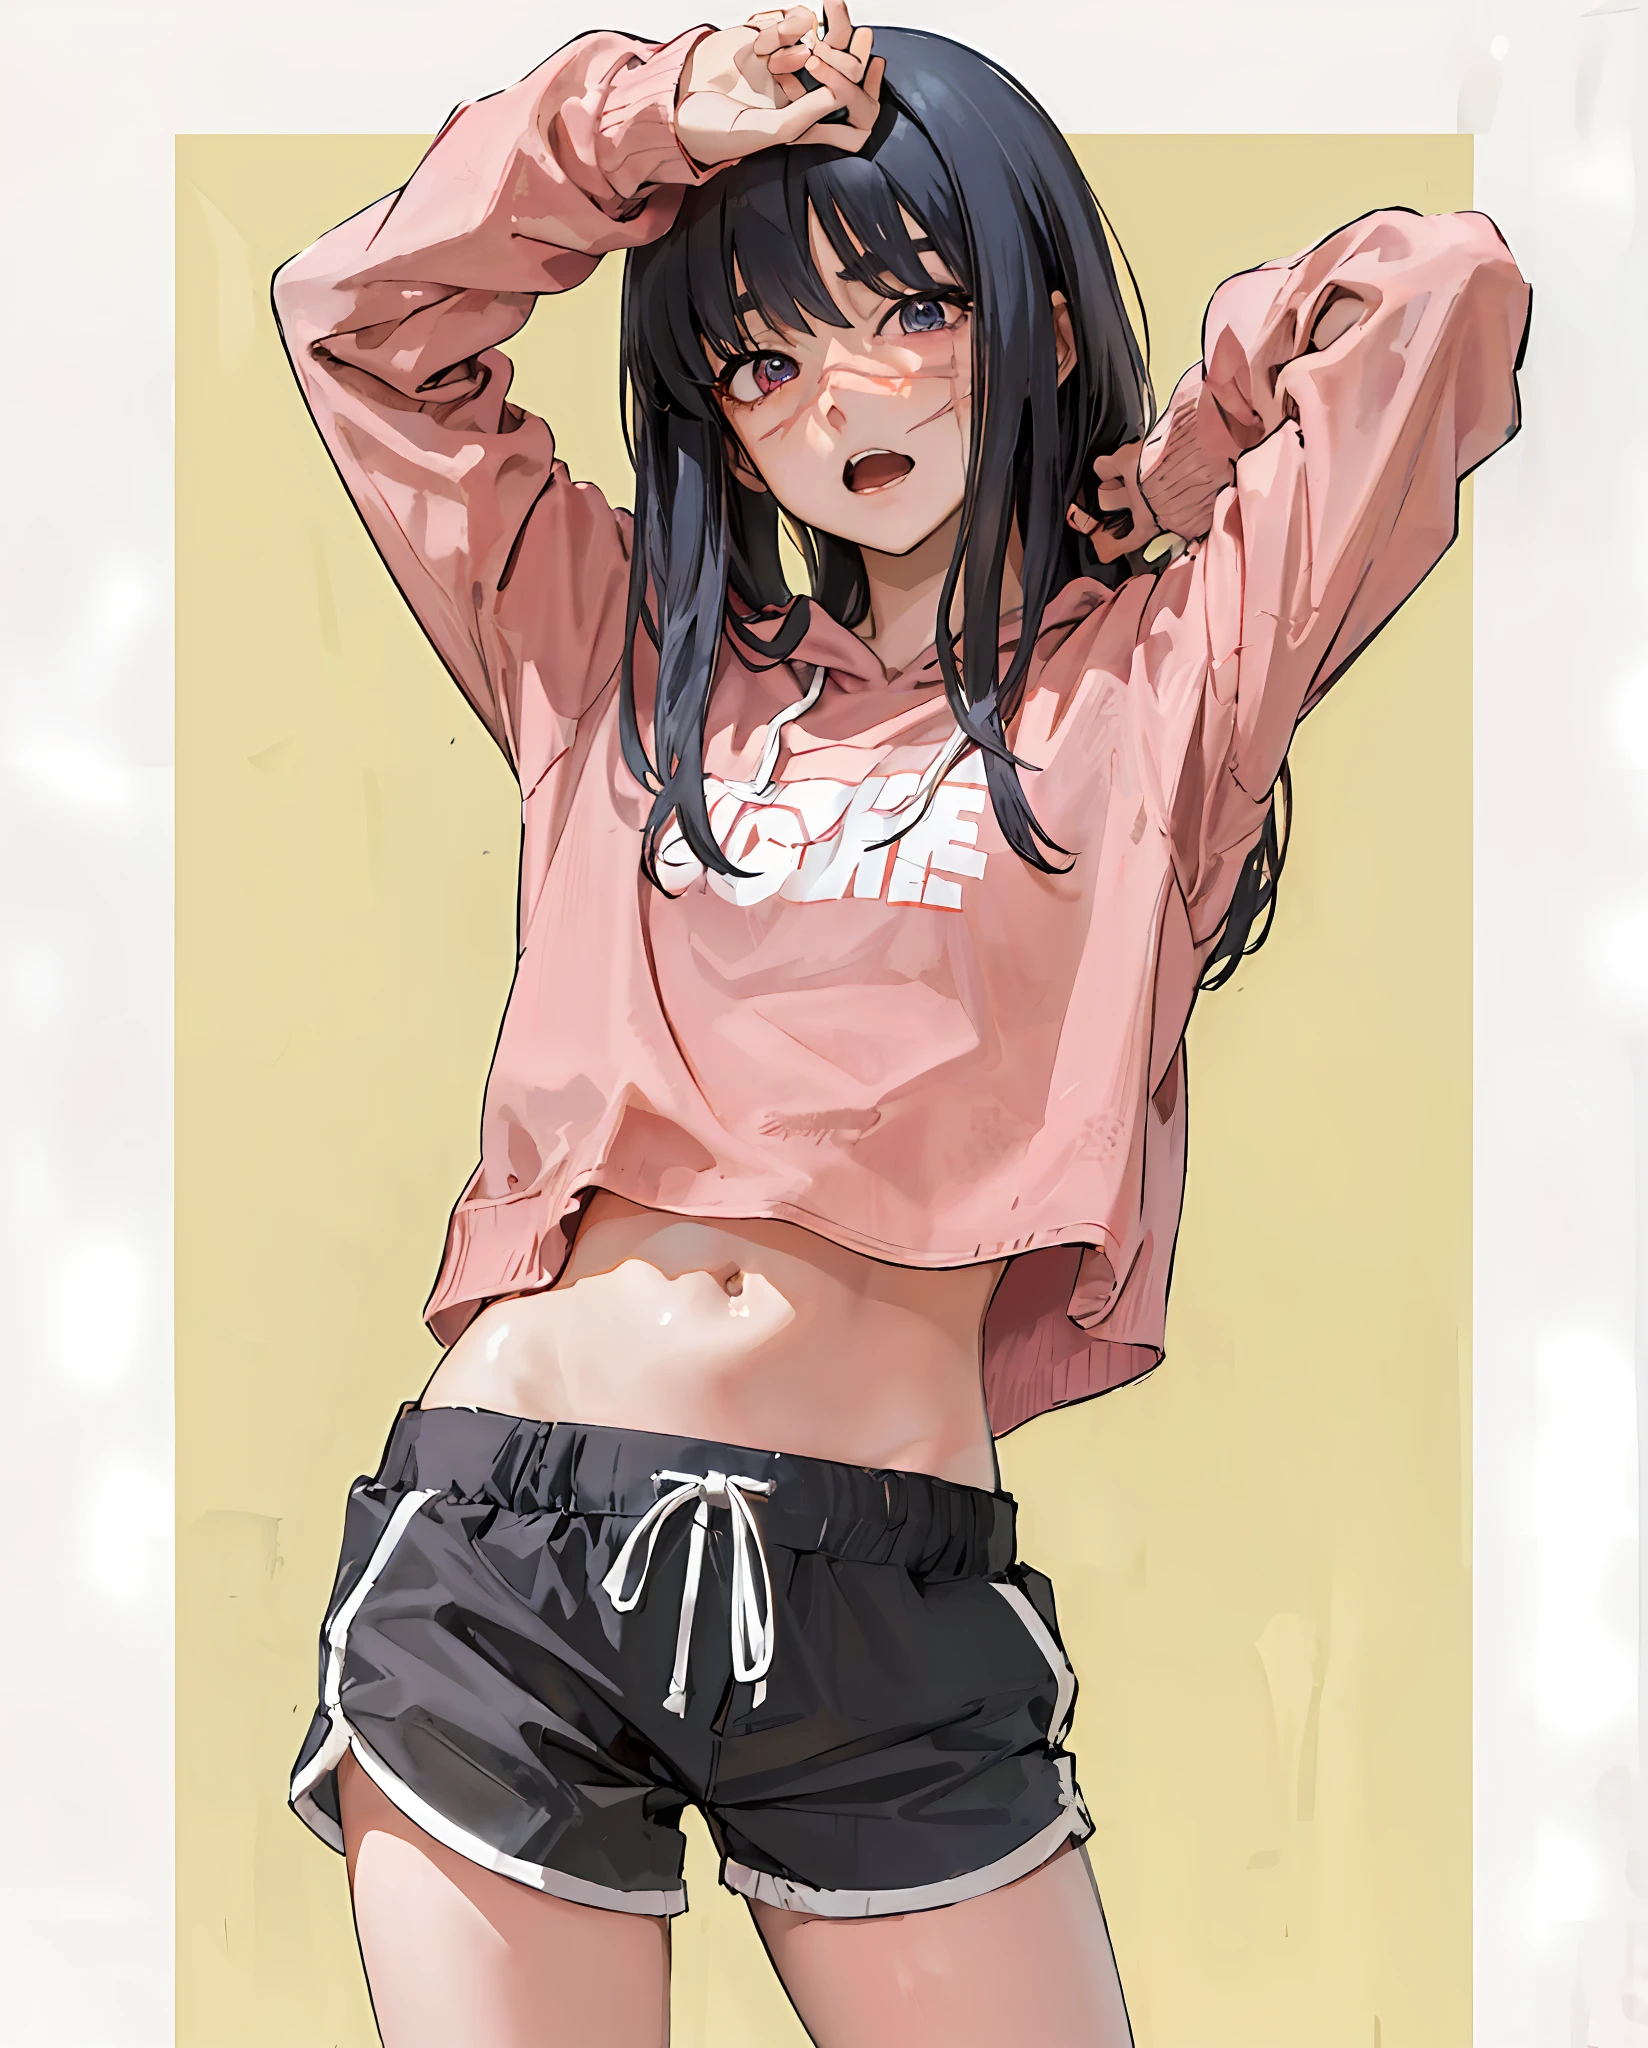 anime girl in pink shirt and black shorts posing for picture, anime moe artstyle, black haired girl wearing hoodie, anime visual of a cute girl, ecchi anime style, anime girl, by Jin Homura, hinata hyuga, in an anime style, in anime style, an anime girl, (anime girl), ecchi style, attractive anime girl, style anime